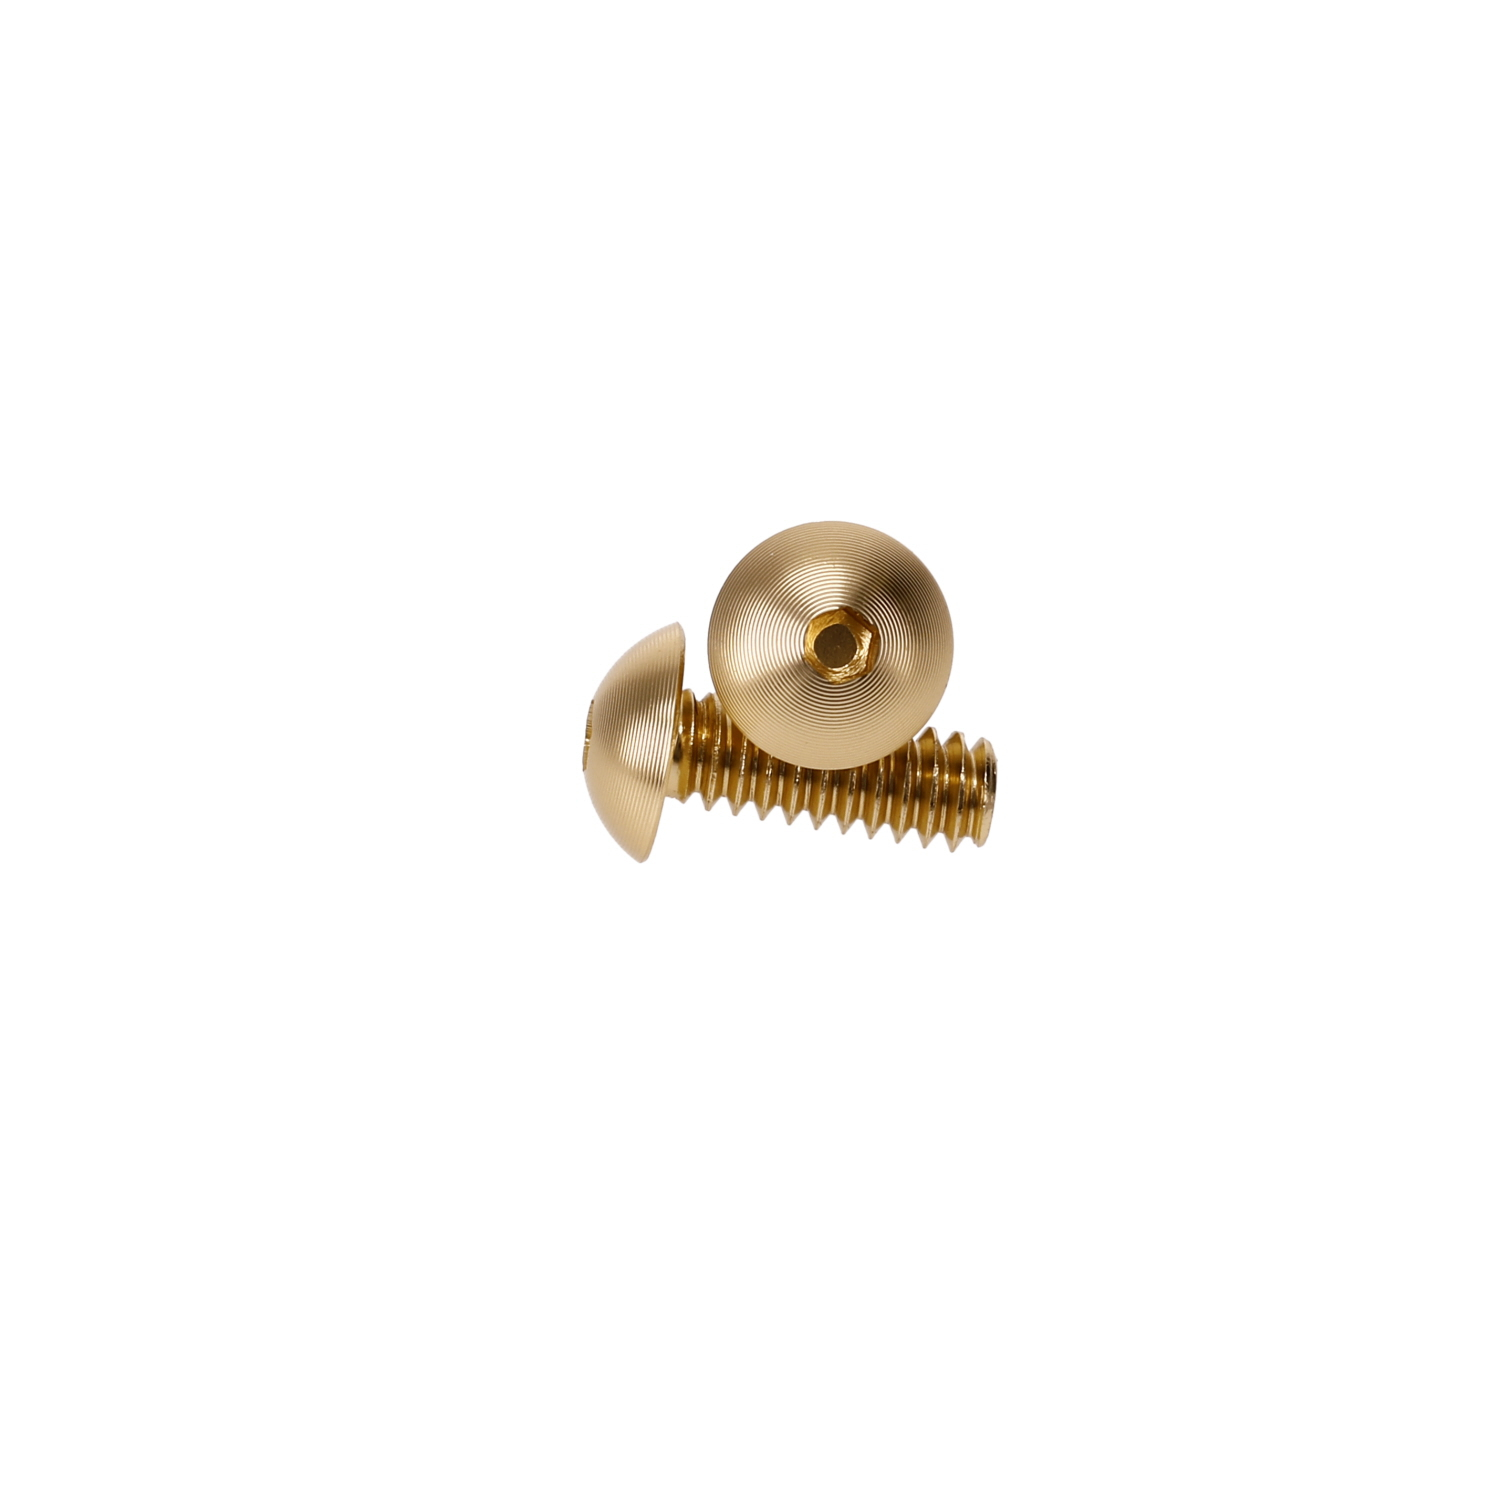 Low Profile Champagne Anodized Aluminum Bolt 10-24 Thread, Length 1/2'', 3/32'' Hex Broach